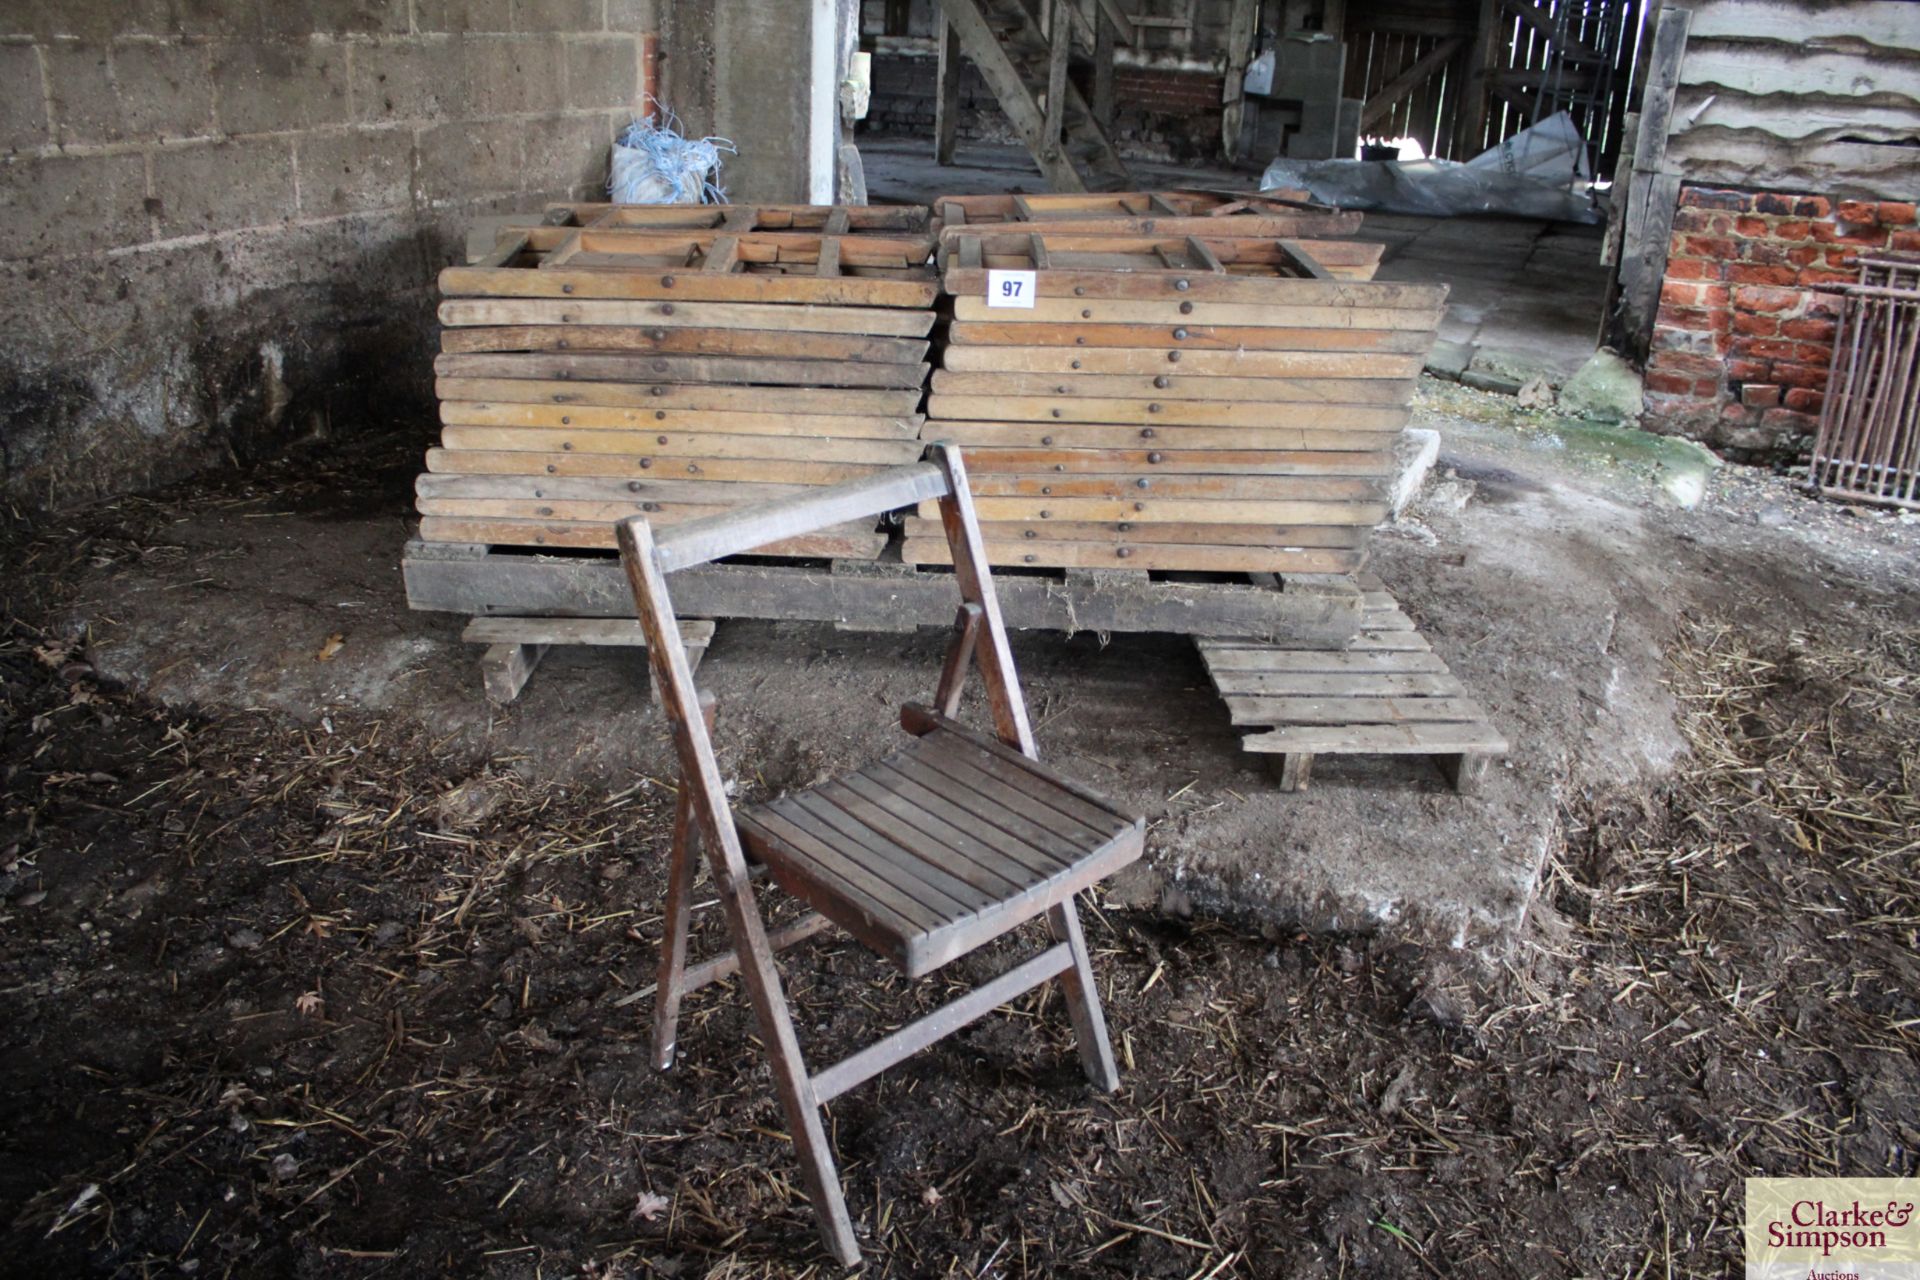 **UPDATED DESCRIPTION** c.45x folding wooden chairs. V